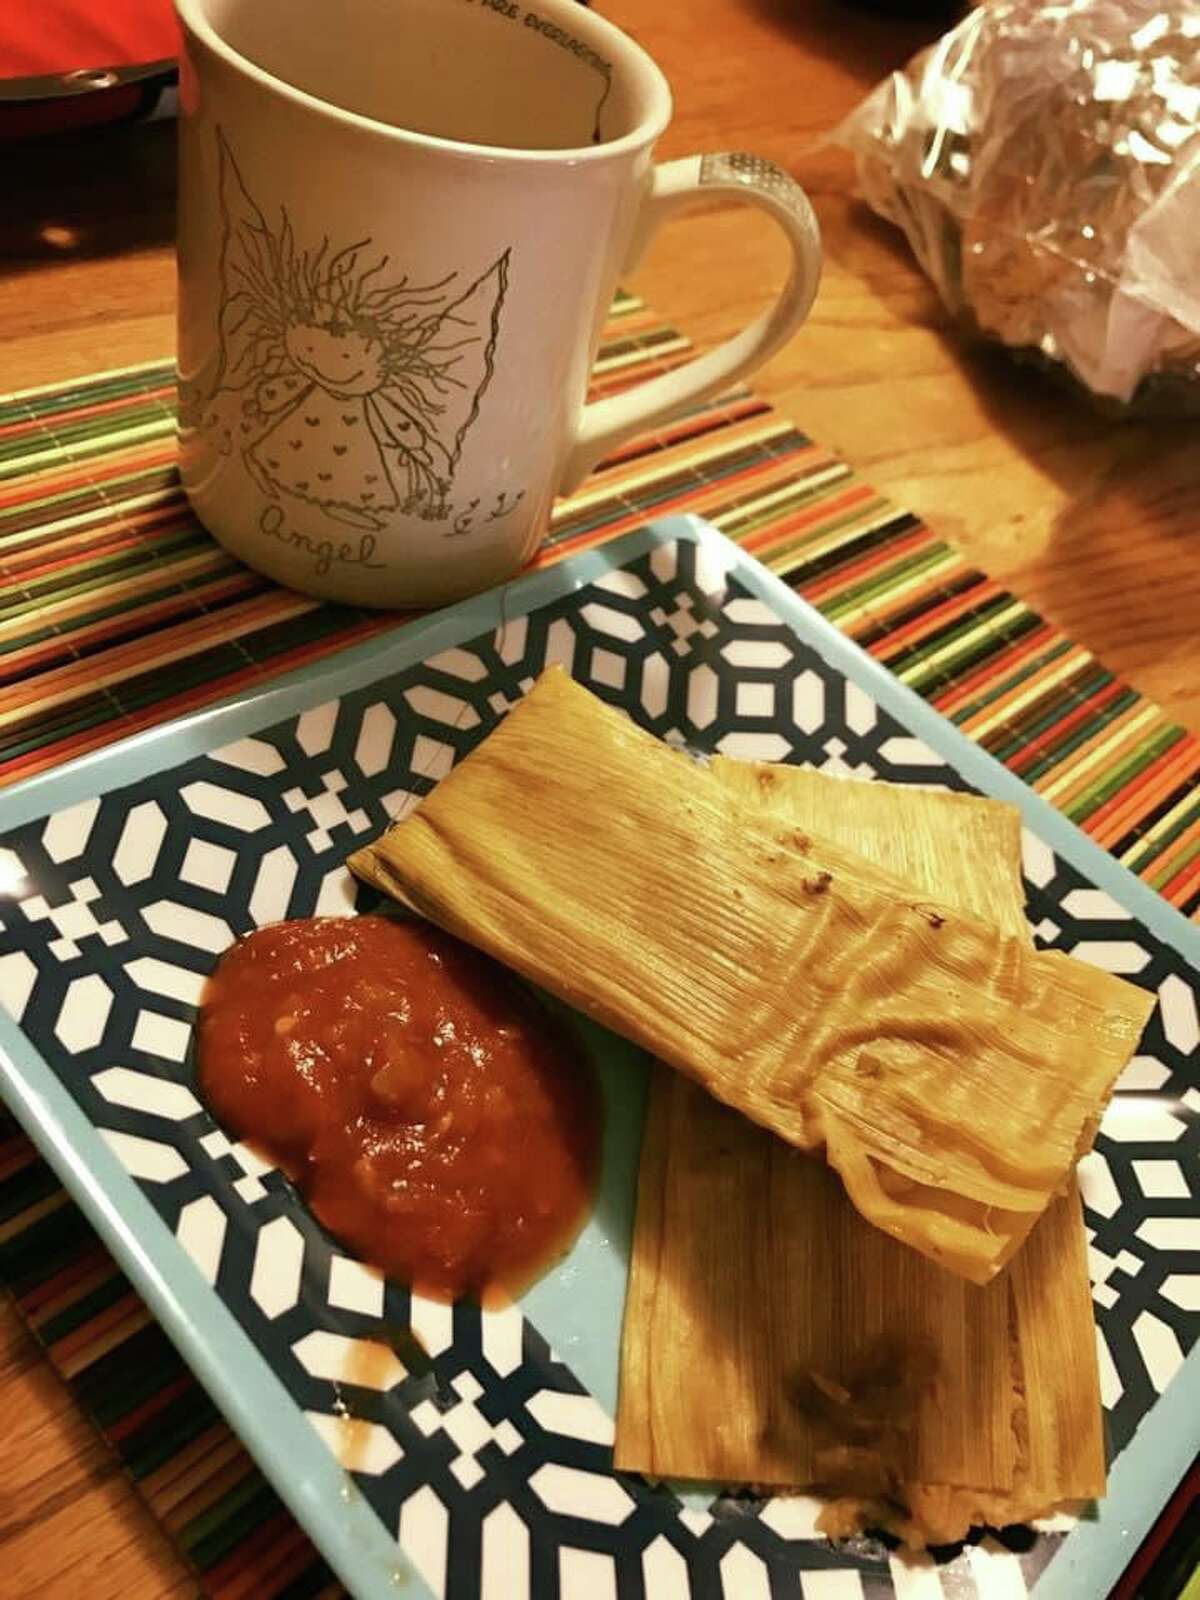 You'd be hard-pressed not to find a few tamales on any ofrenda around town. It's one of the most common foods left out on the altar.  The key is to leave the deceased's favorite kind on the ofrenda. 